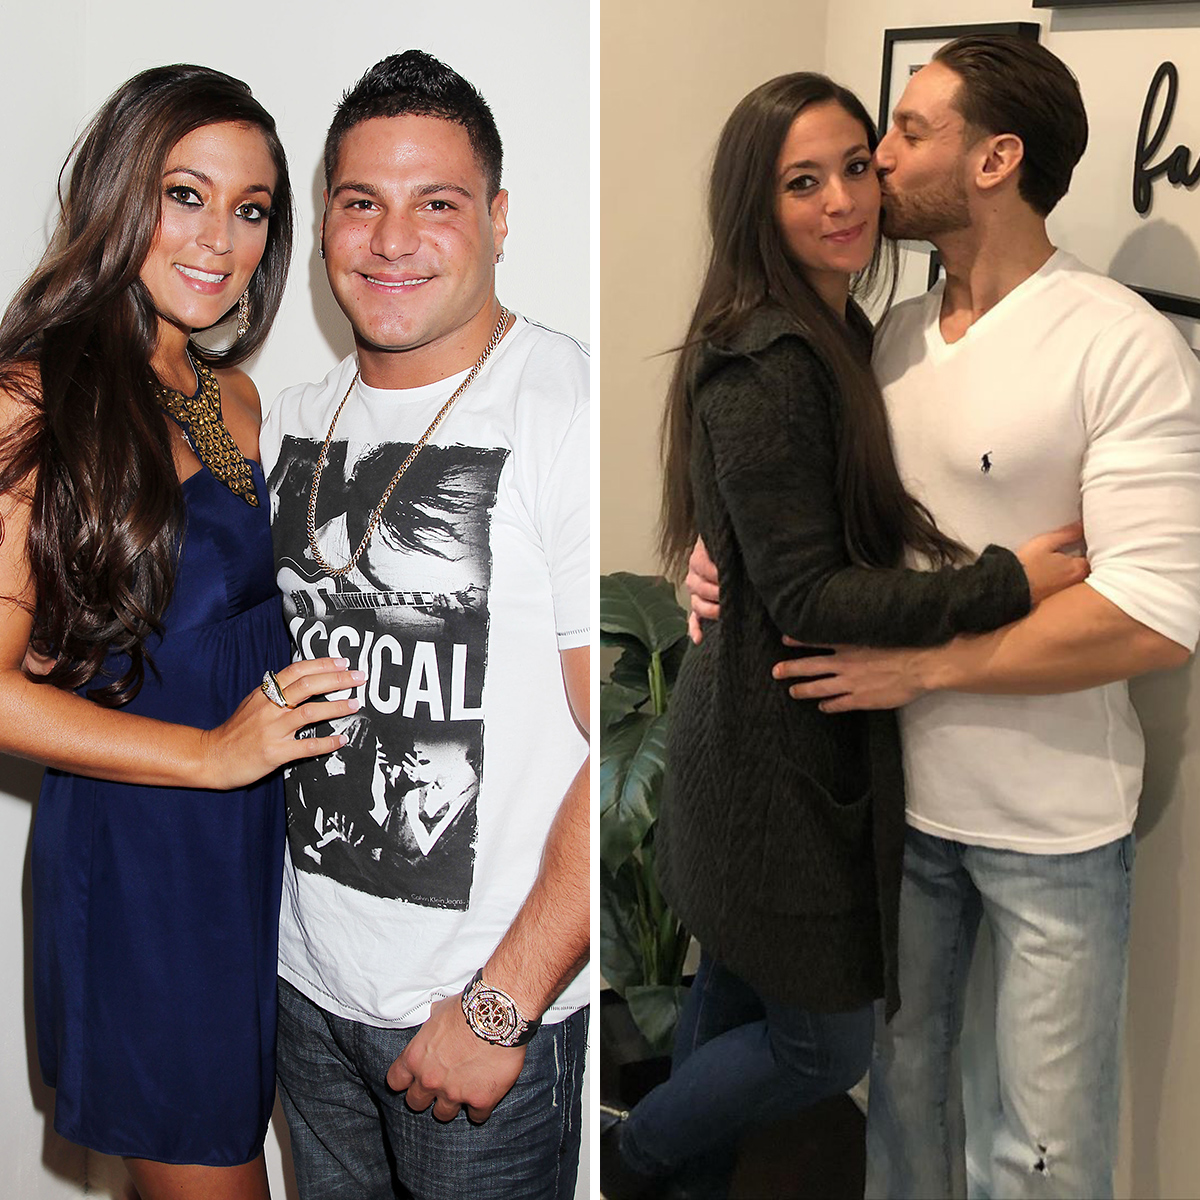 Sammi Sweetheart's Dating History From Ronnie to Fiance Christian